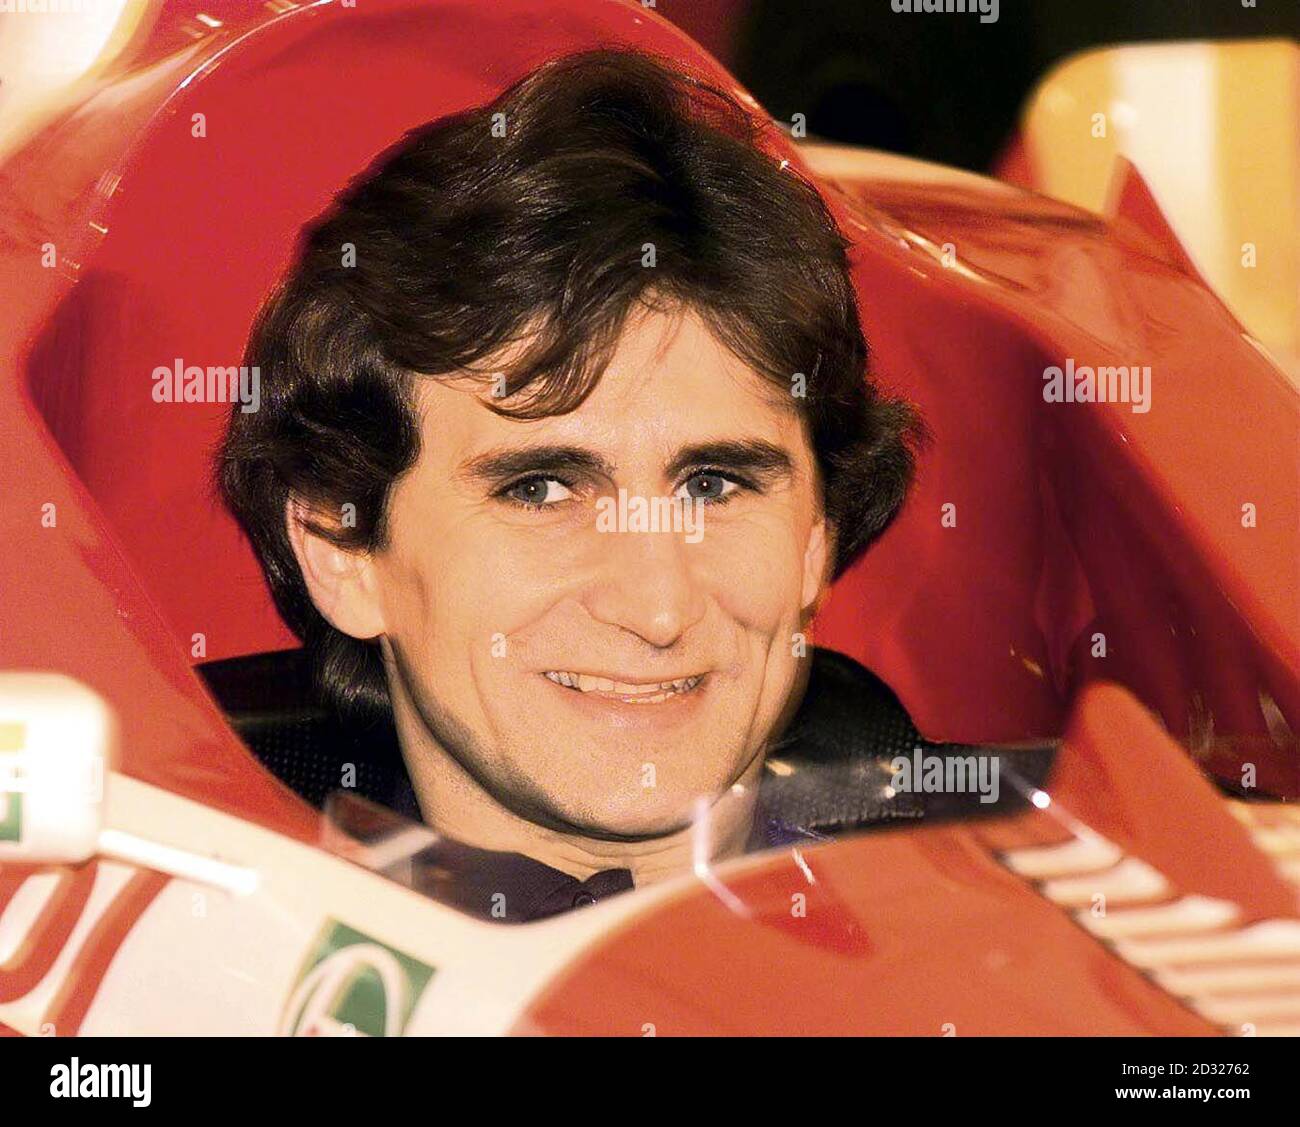 Former Formula One driver Alex Zanardi at the Autosports International Show, NEC Birmingham. 17/9/01: Former Formula One driver and two-time CART champion Alex Zanardi lost both of his lower legs in a horrifying crash at The American Memorial, Germany.   * The 34-year-old has been airlifted to a Berlin hospital after he lost control of his Honda and was hit at 200mph while exiting the pit-lane. He has lost one leg from below the knee and the other from above the knee. Stock Photo